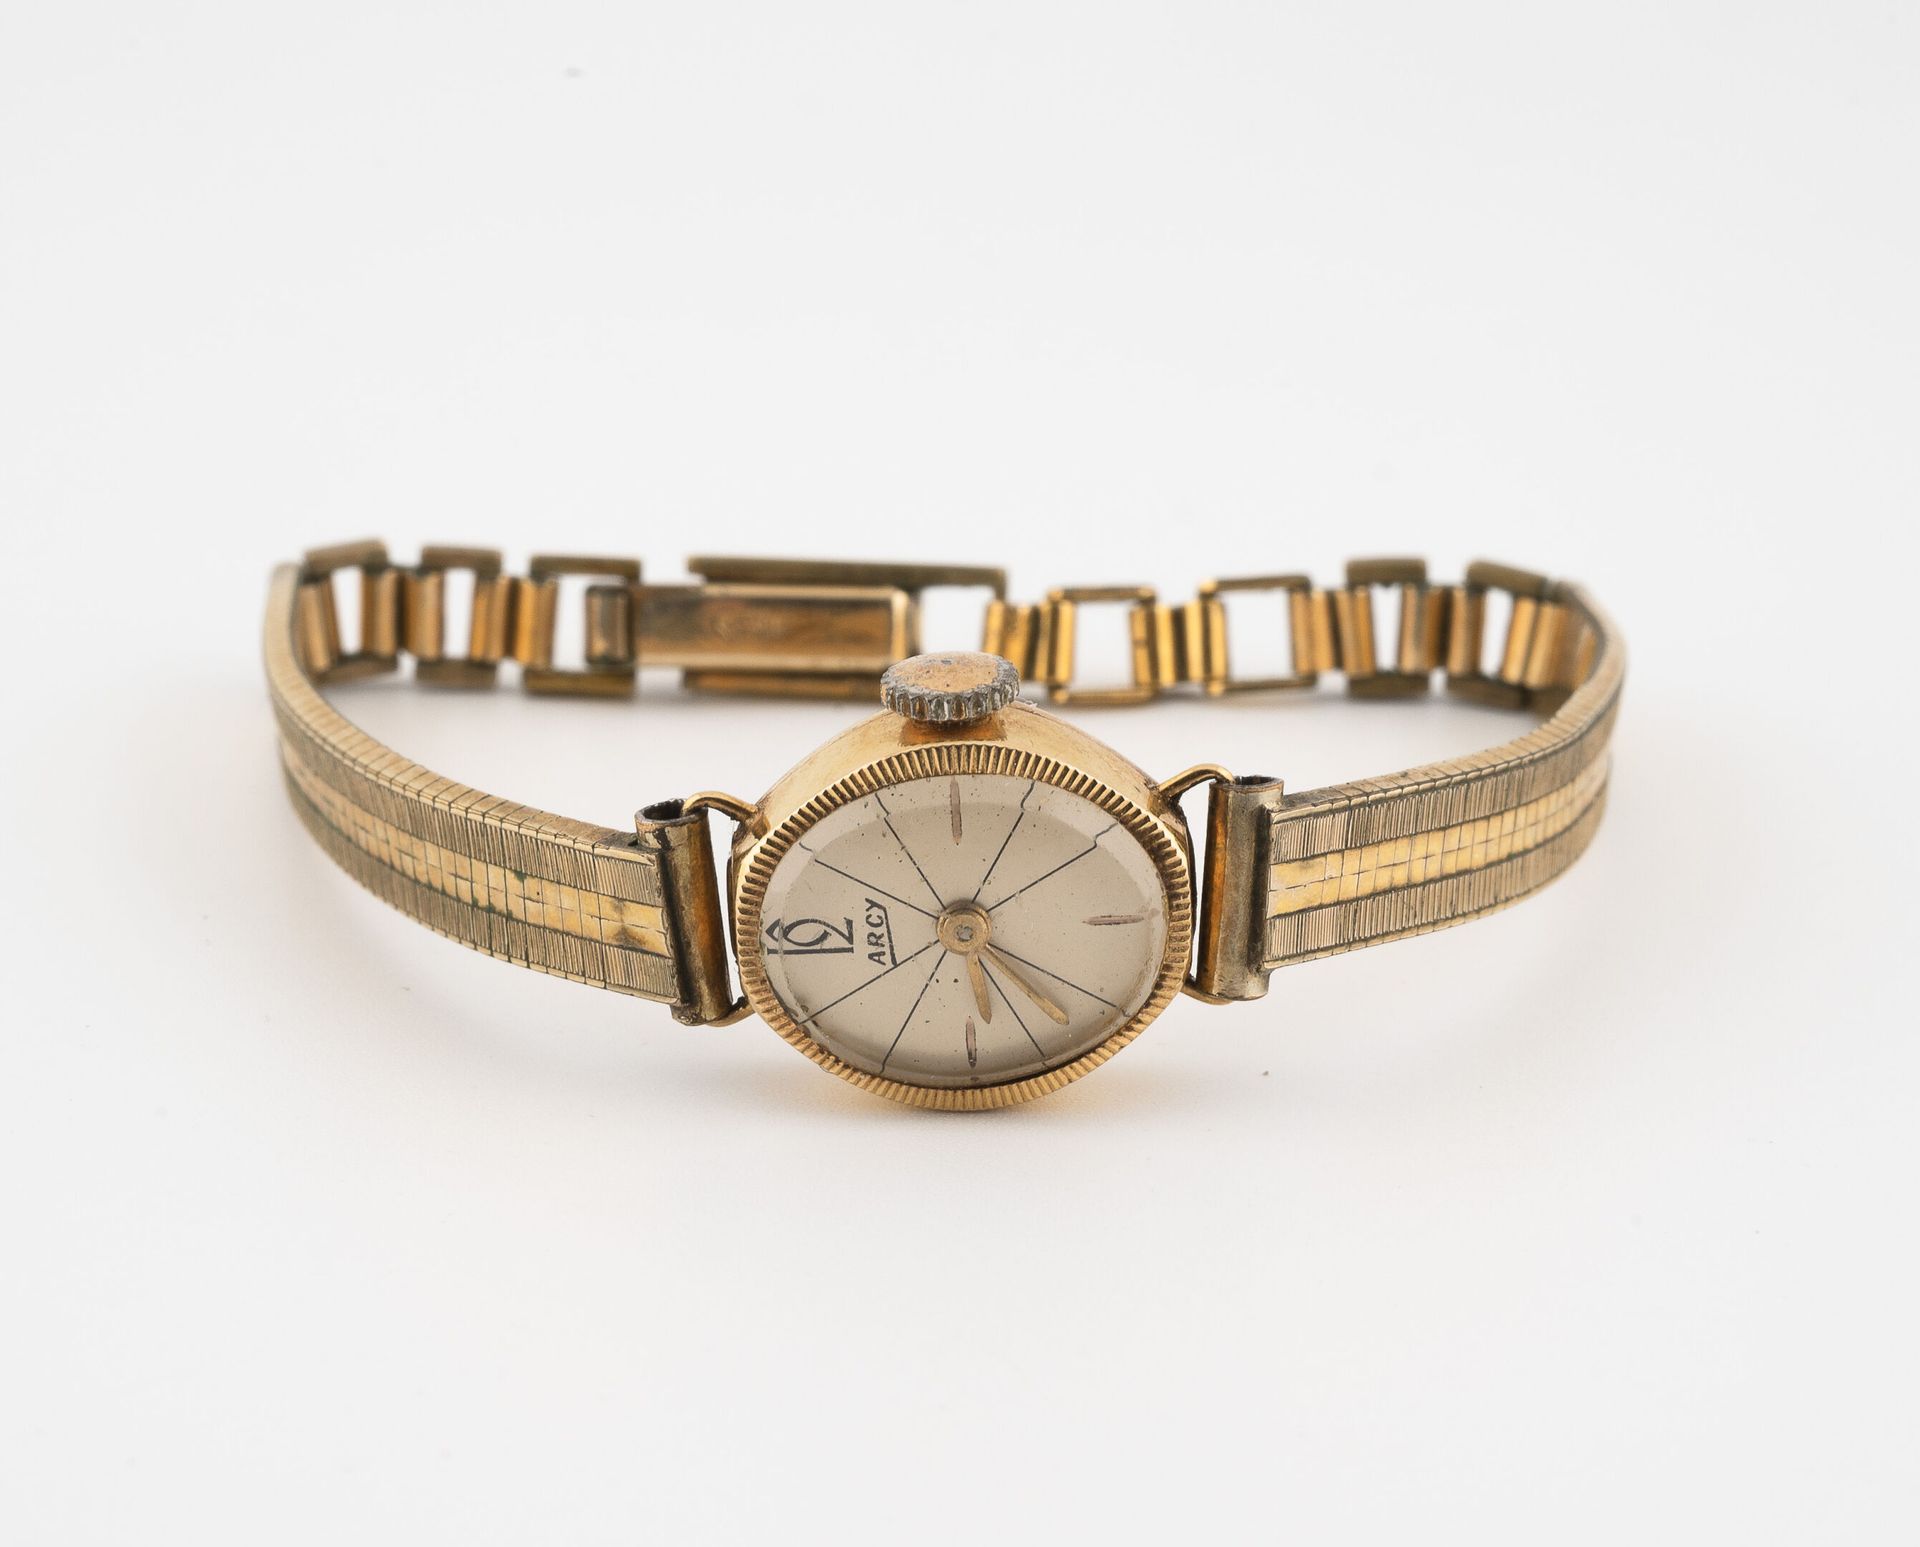 ARCY Lady's wrist watch.

Yellow gold case (750). 

Dial with cream background, &hellip;